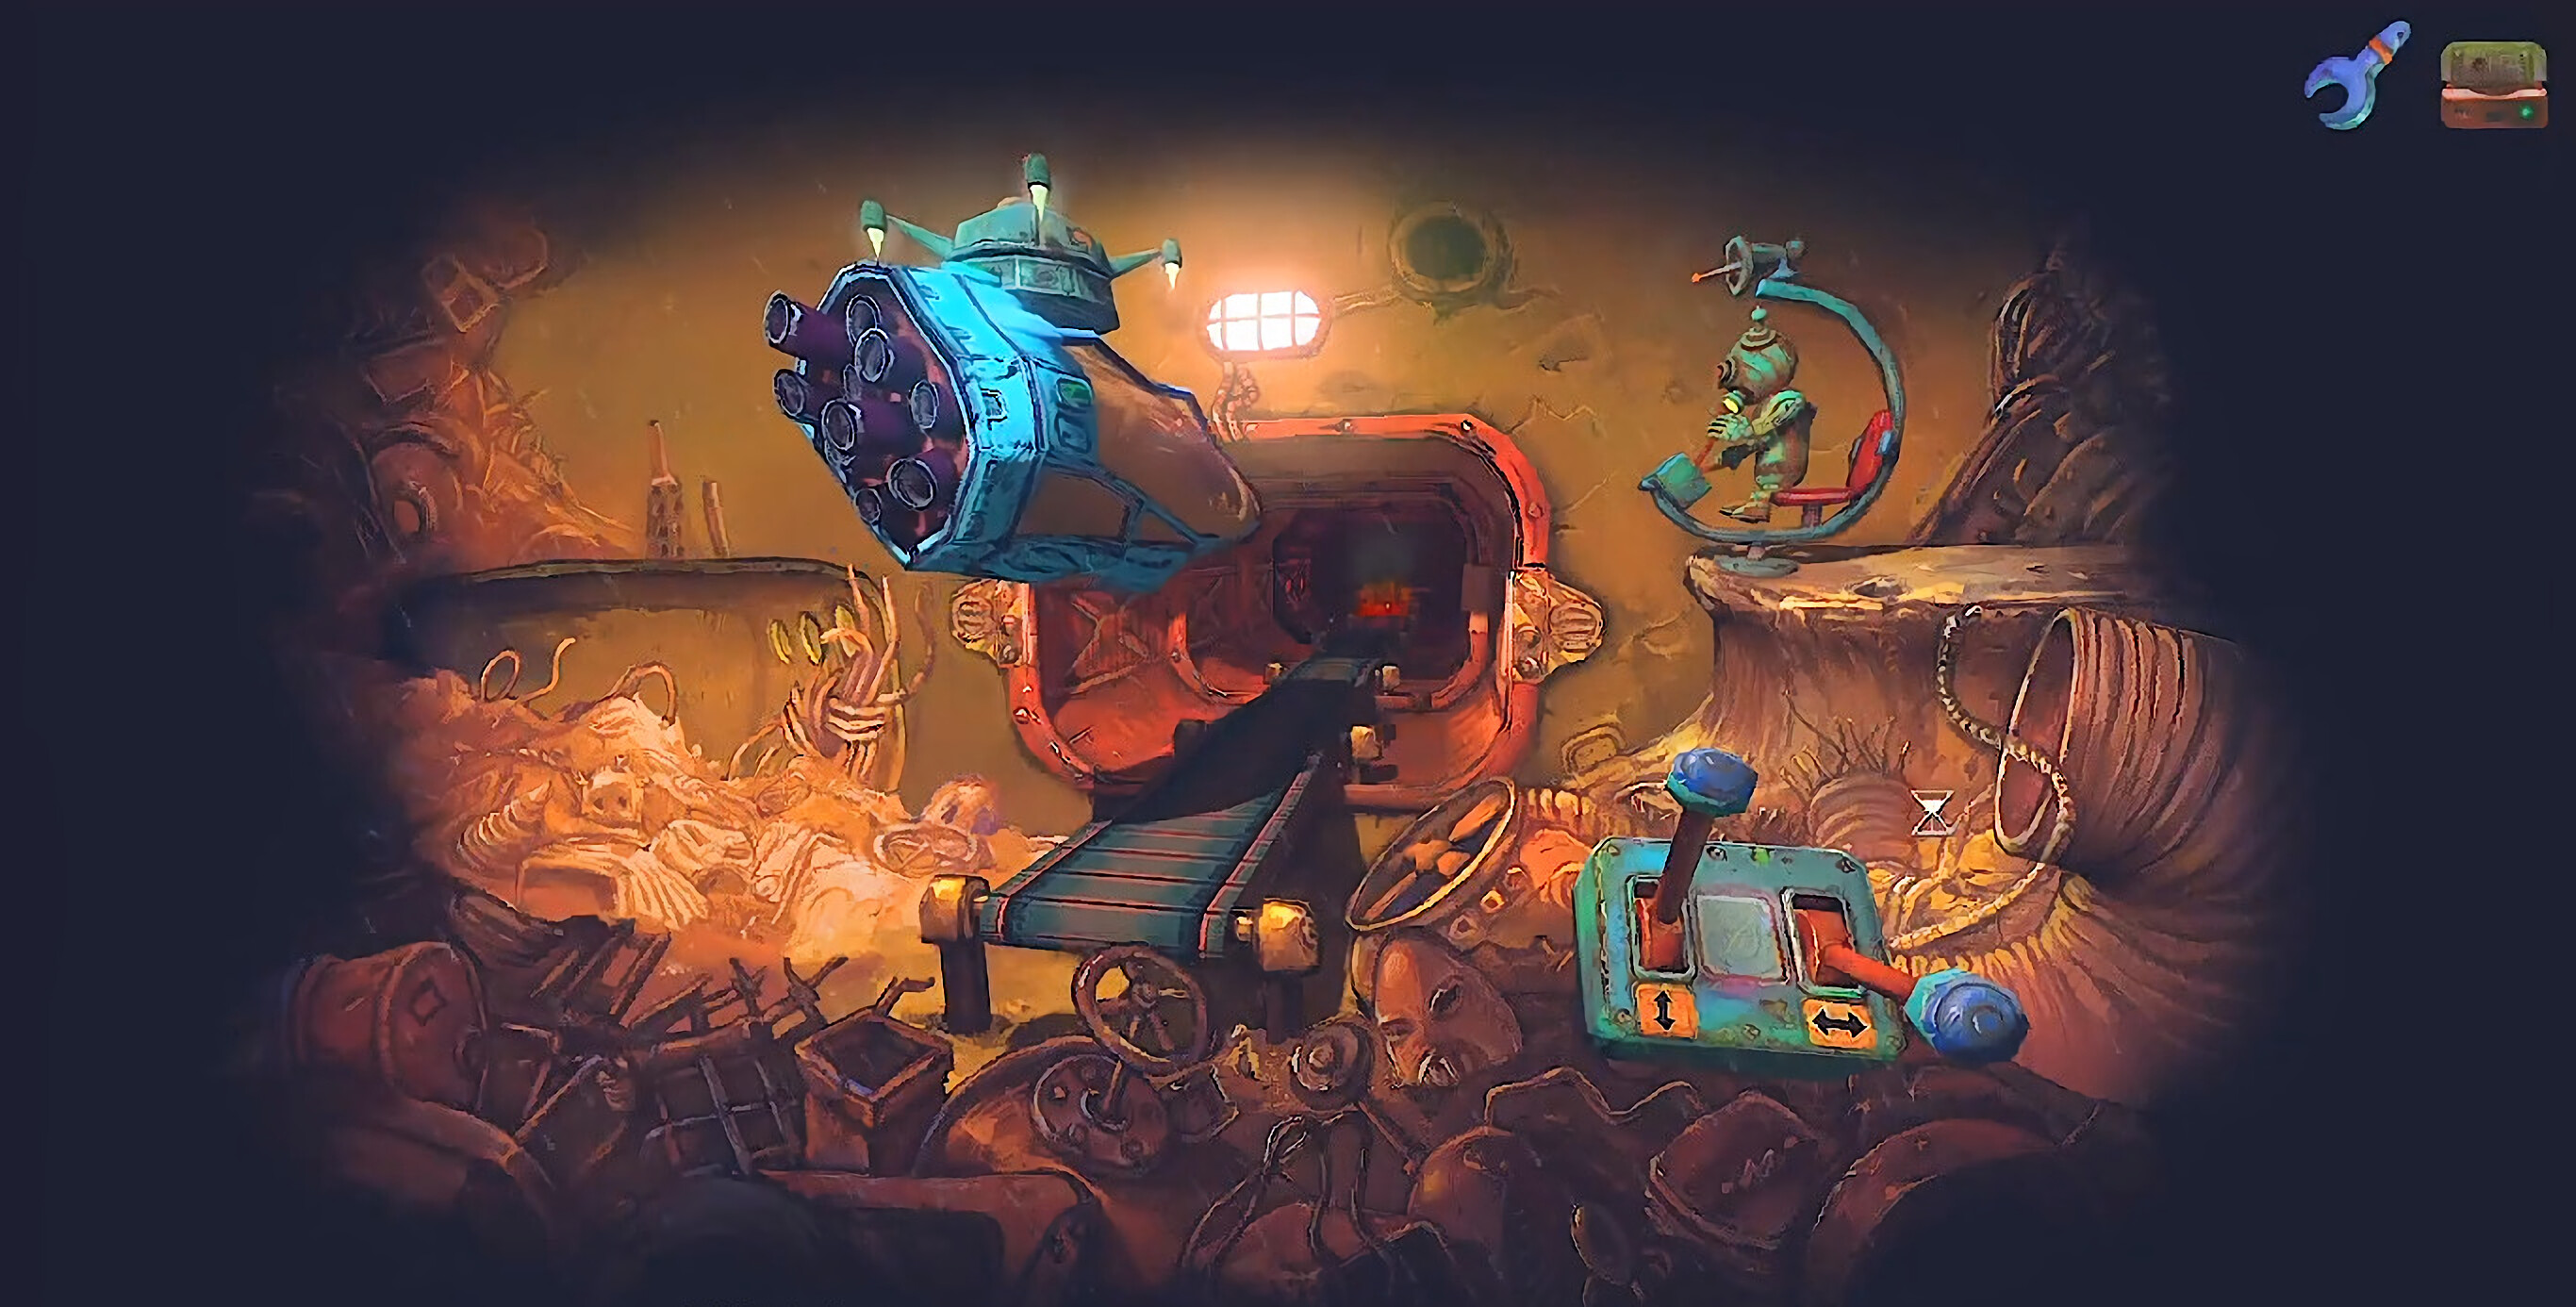 Mechanic 8230 (Game): Post-apocalyptic quest developed by Nudiventra. 2740x1390 HD Wallpaper.